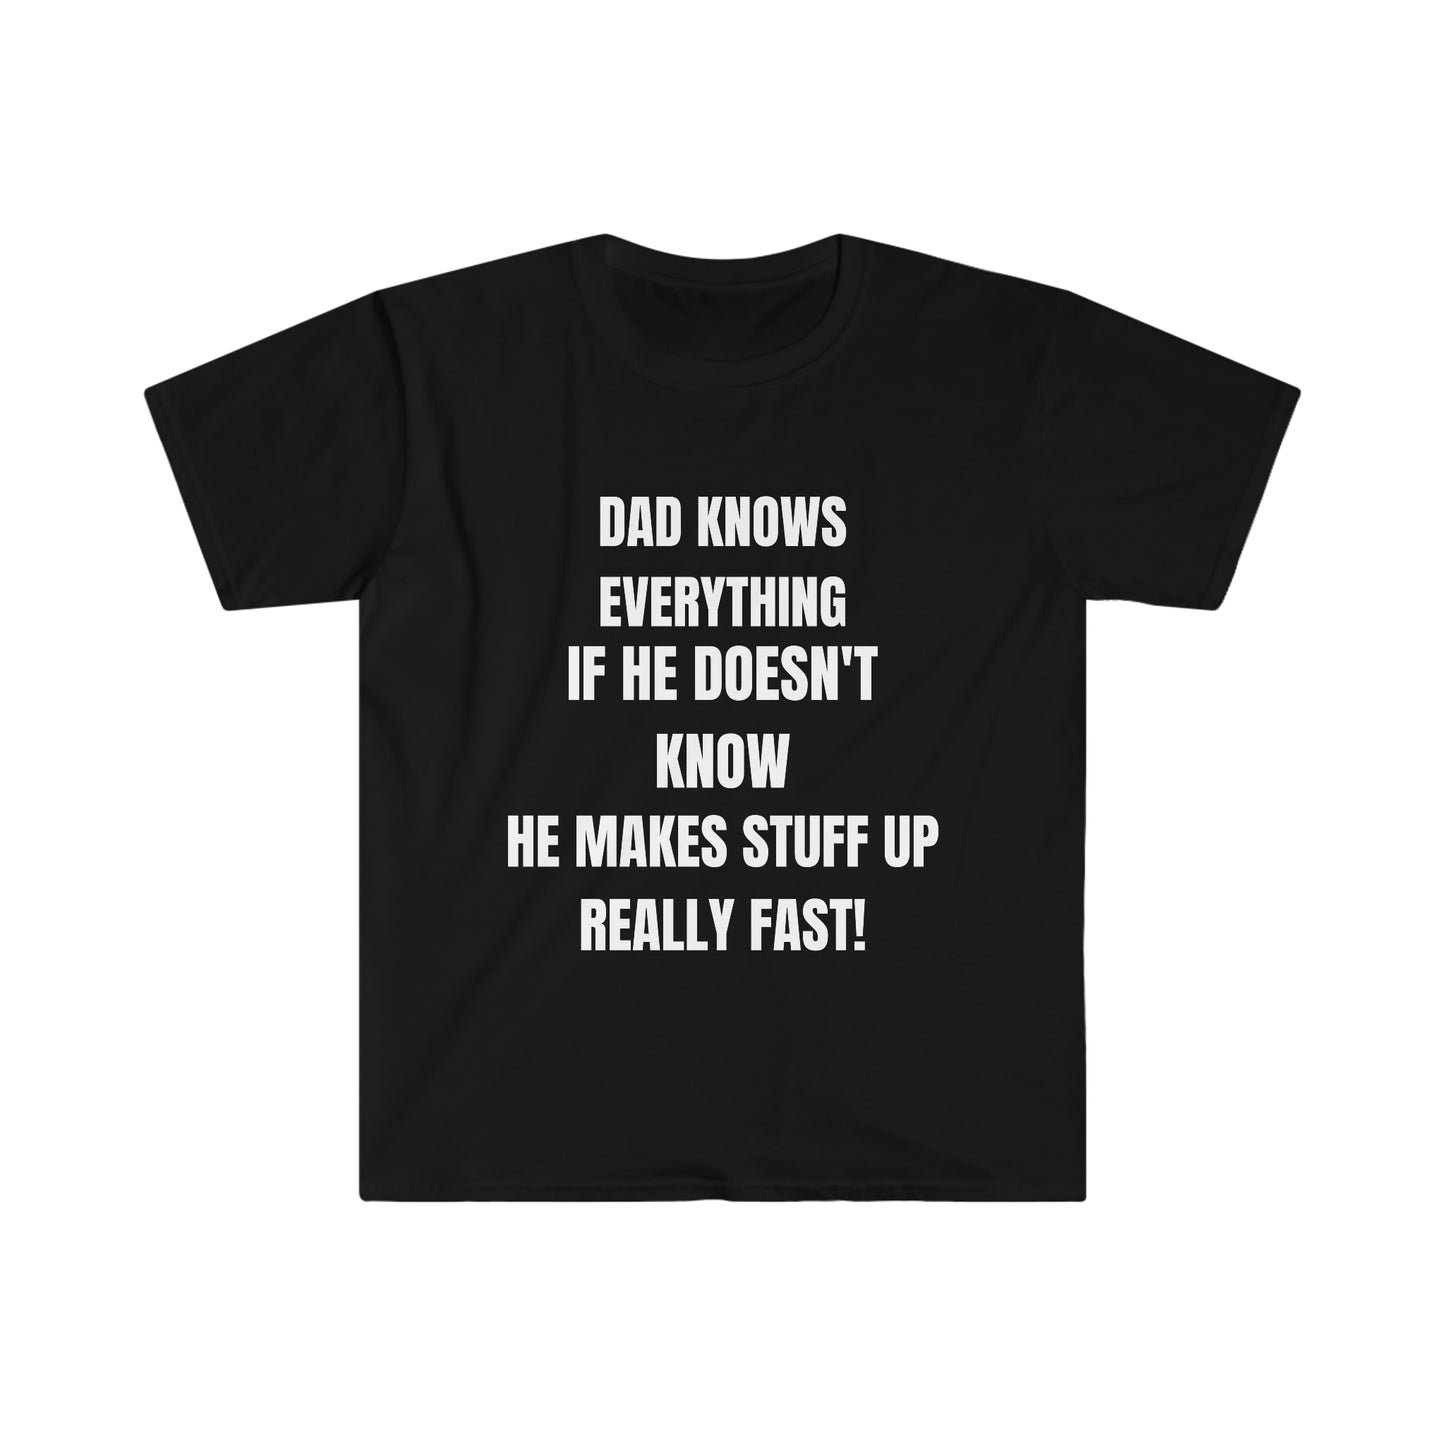 Unisex Jersey Tee: Short Sleeve, "Dad Knows Everything" Humorous Design